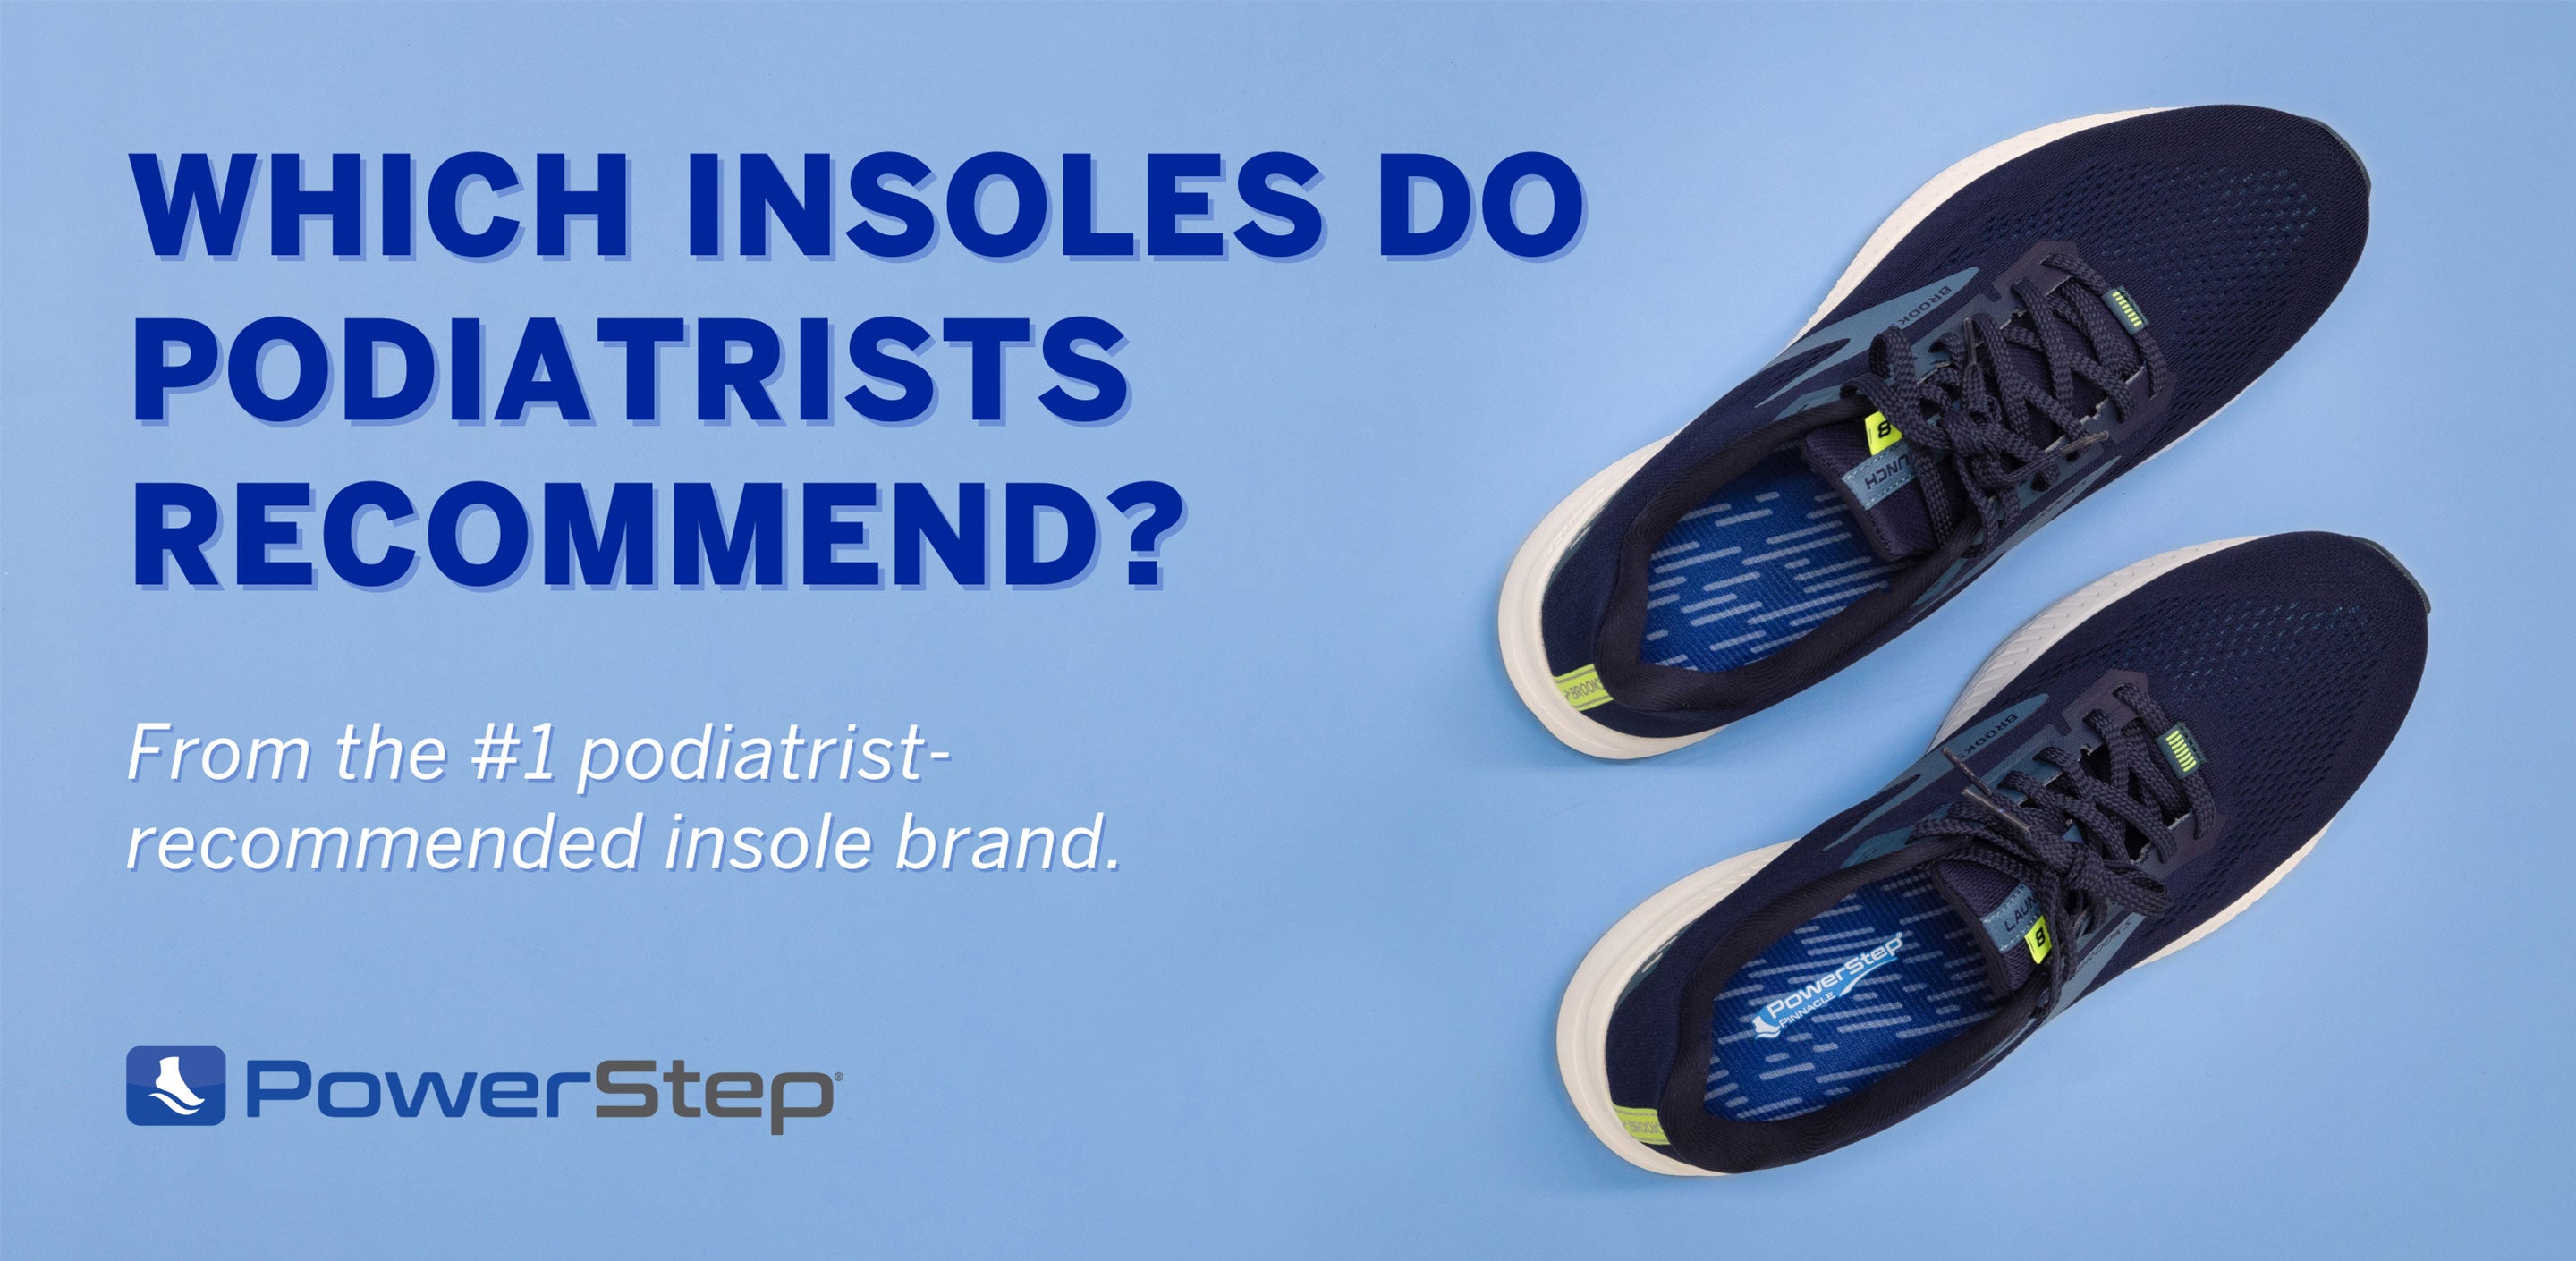 Which Insoles Do Podiatrists Recommend? by PowerStep Orthotic Insoles